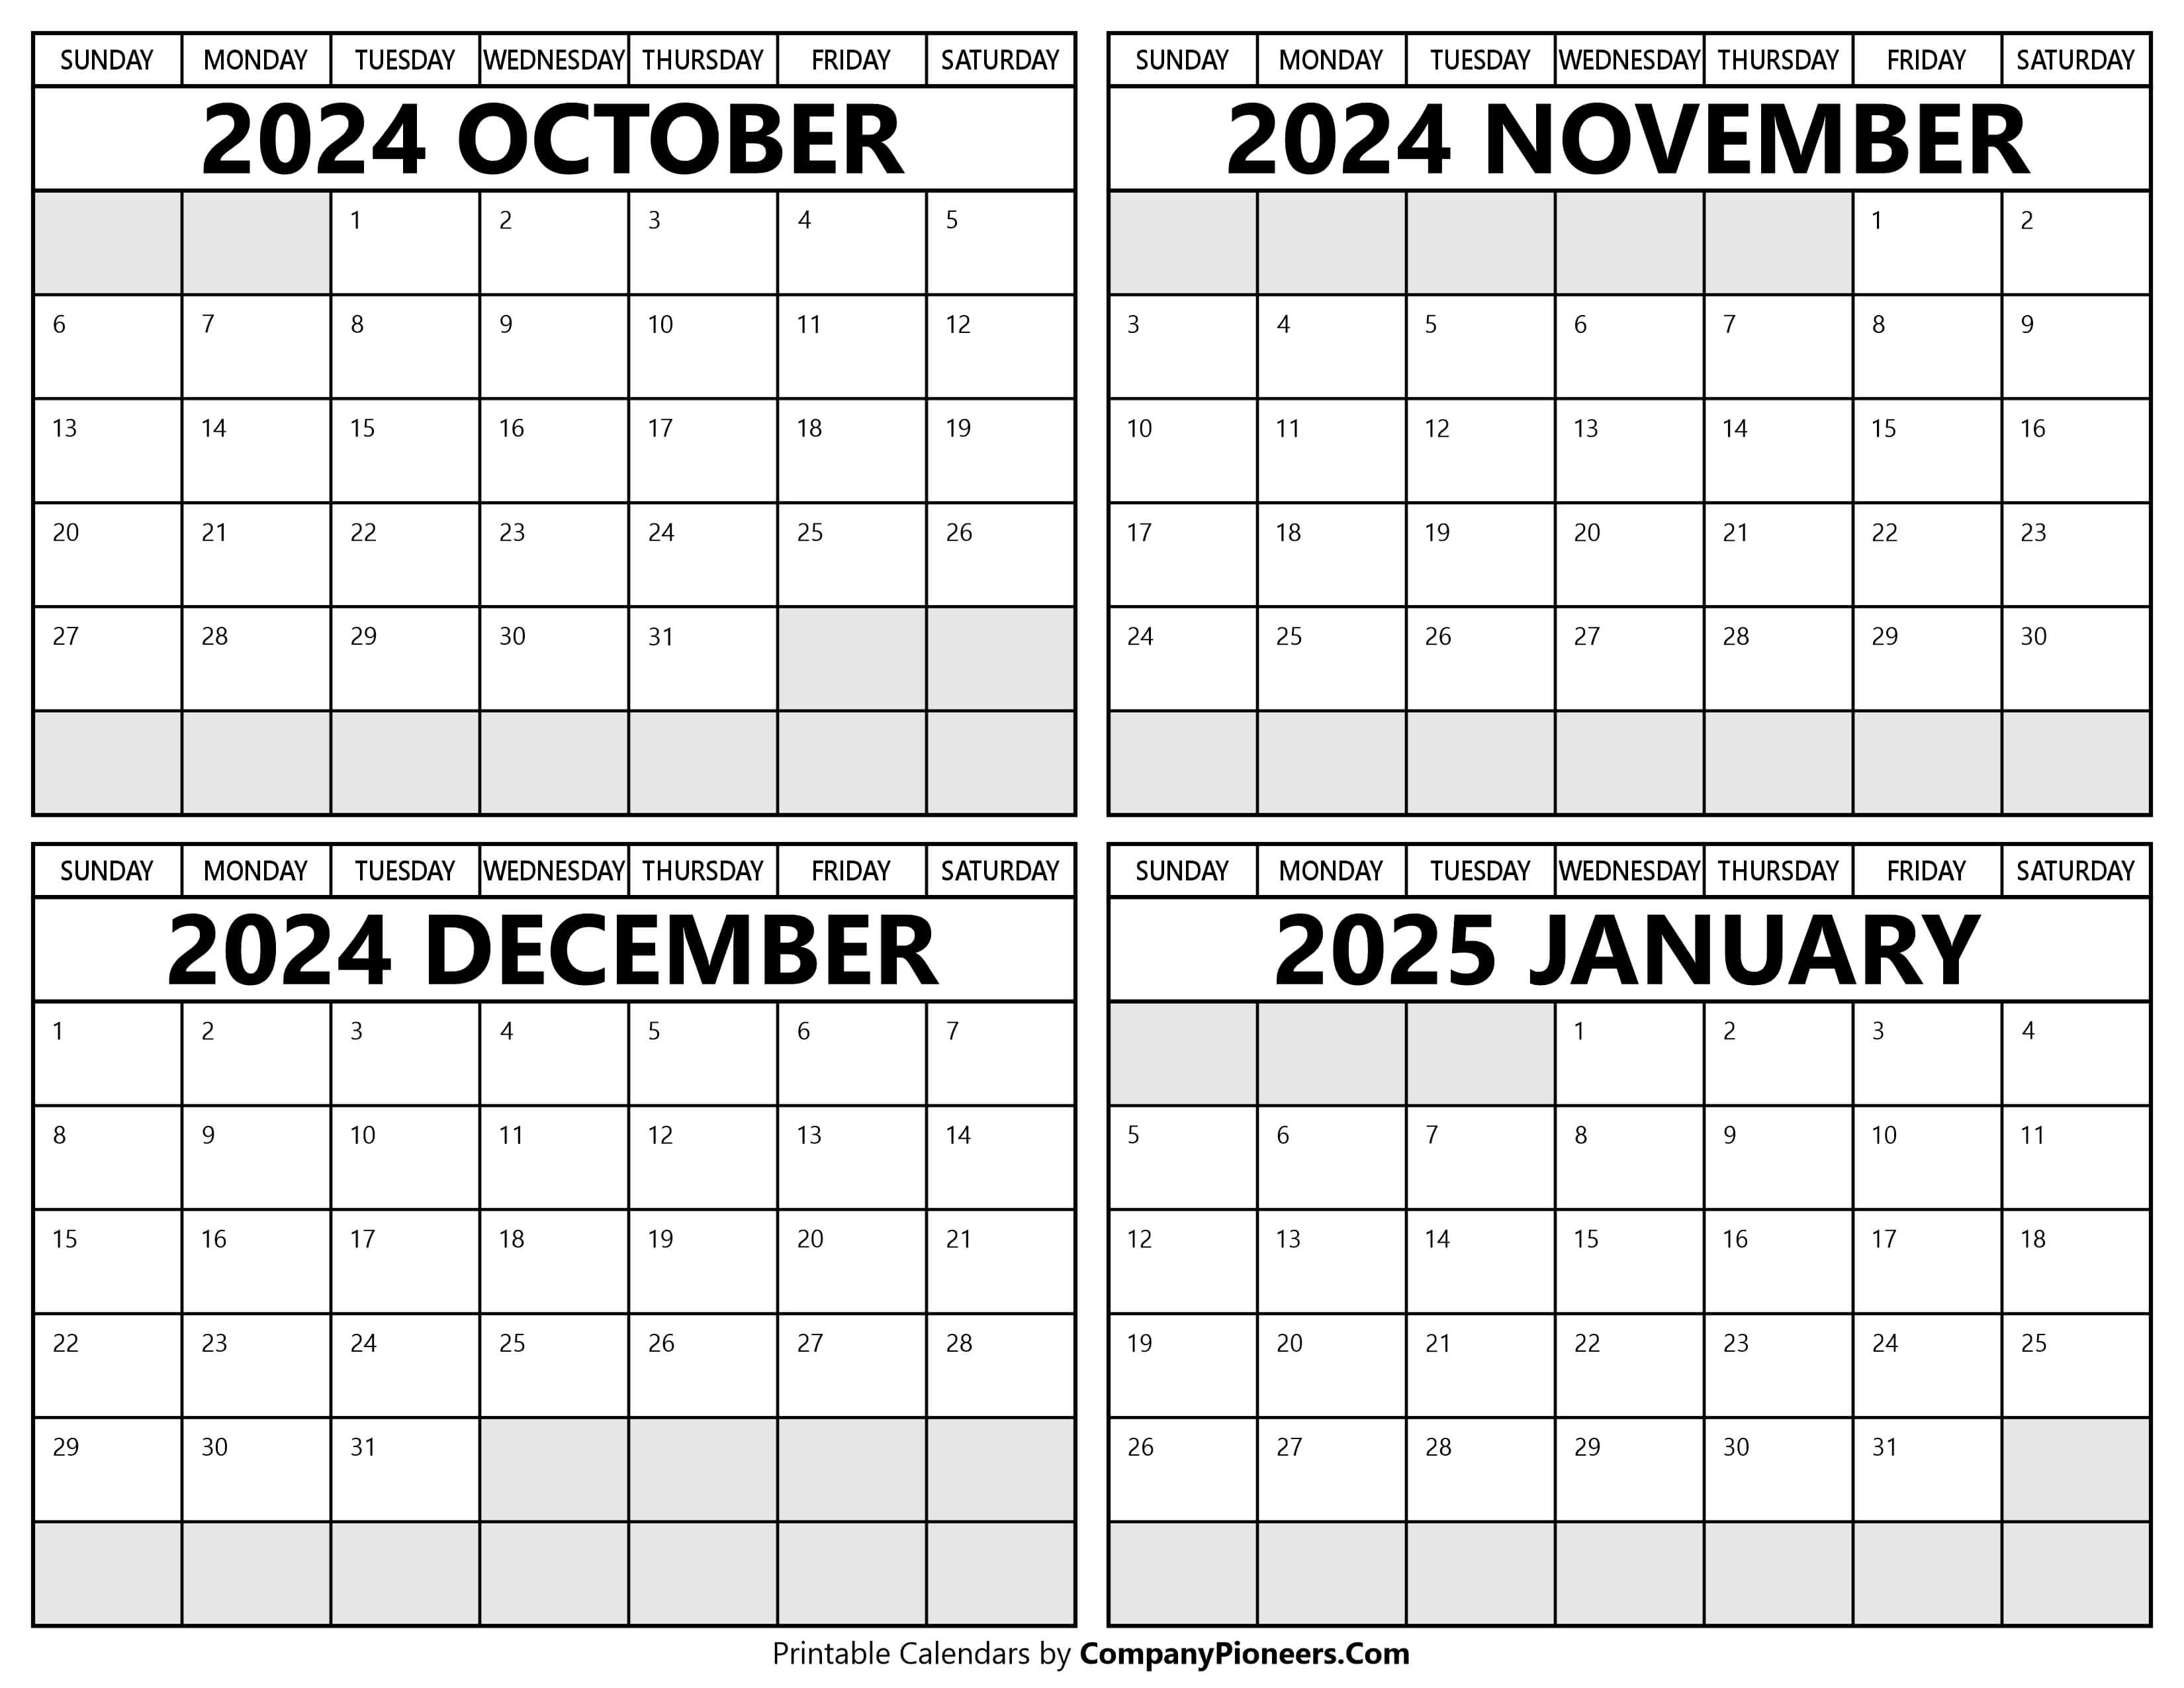 Printable October 2024 to January 2025 Calendars